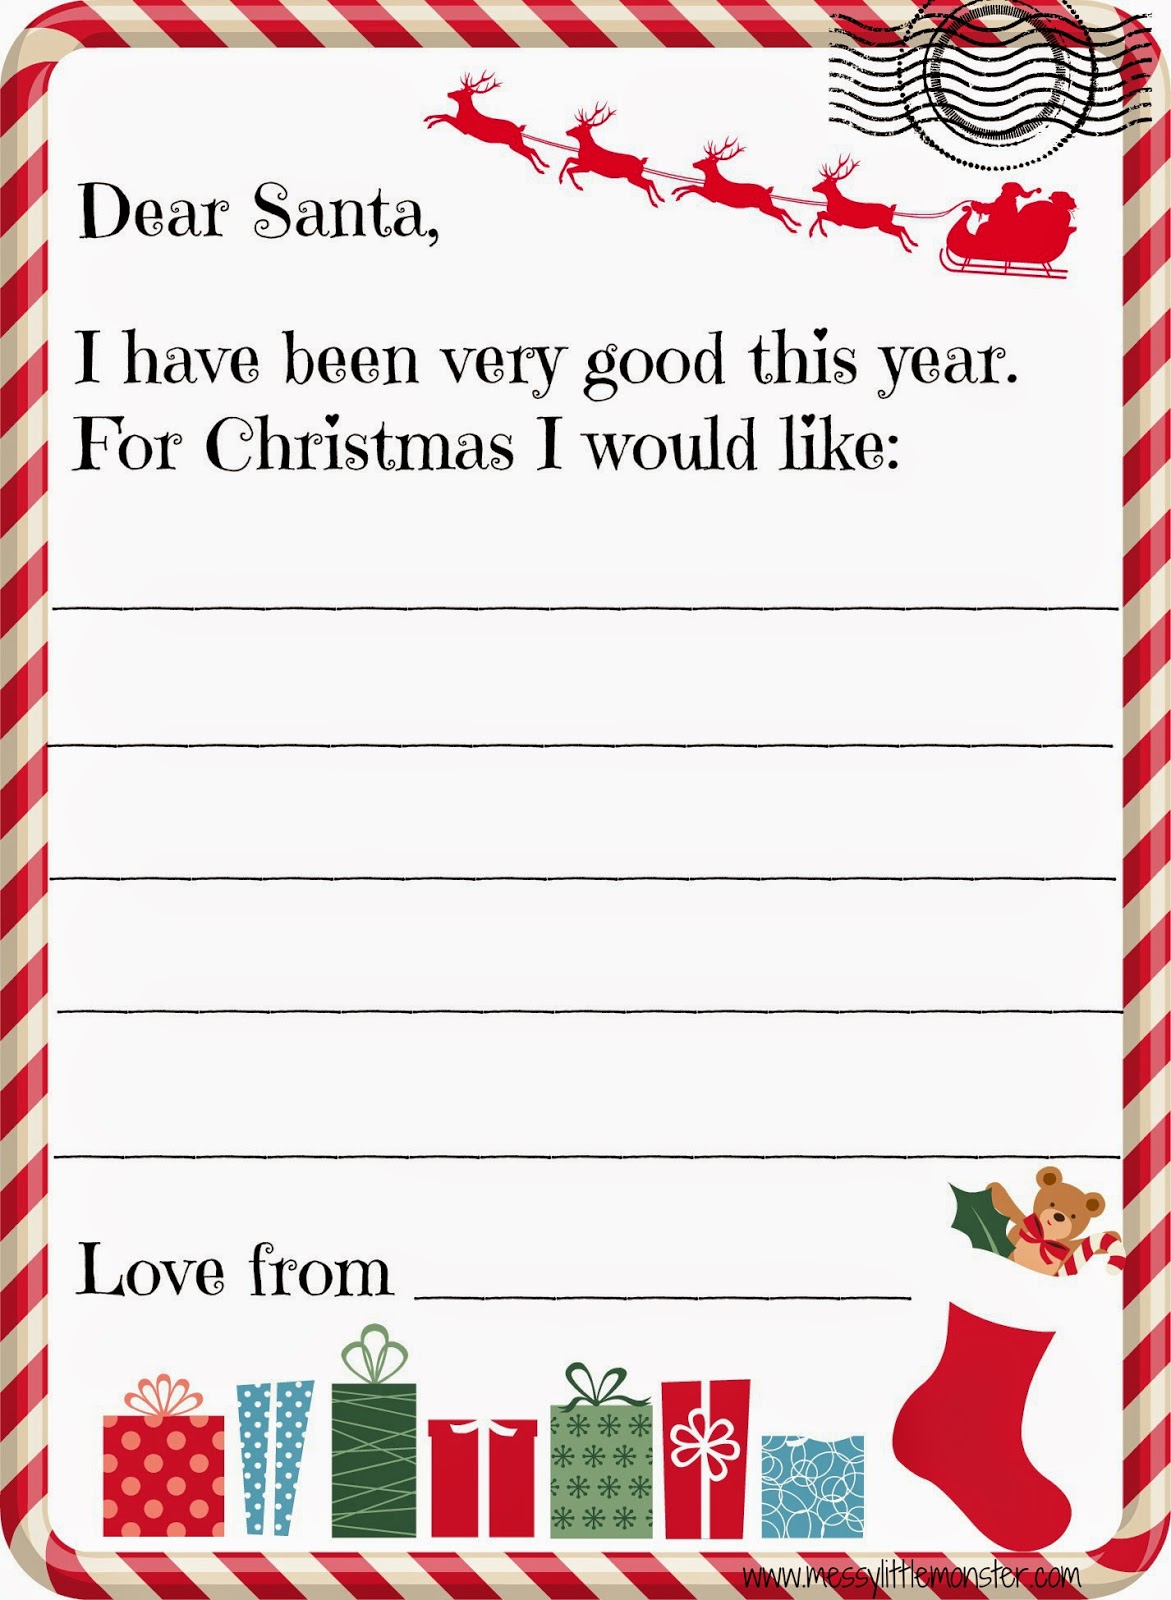 letter-from-santa-free-printable-free-letters-from-santa-claus-2